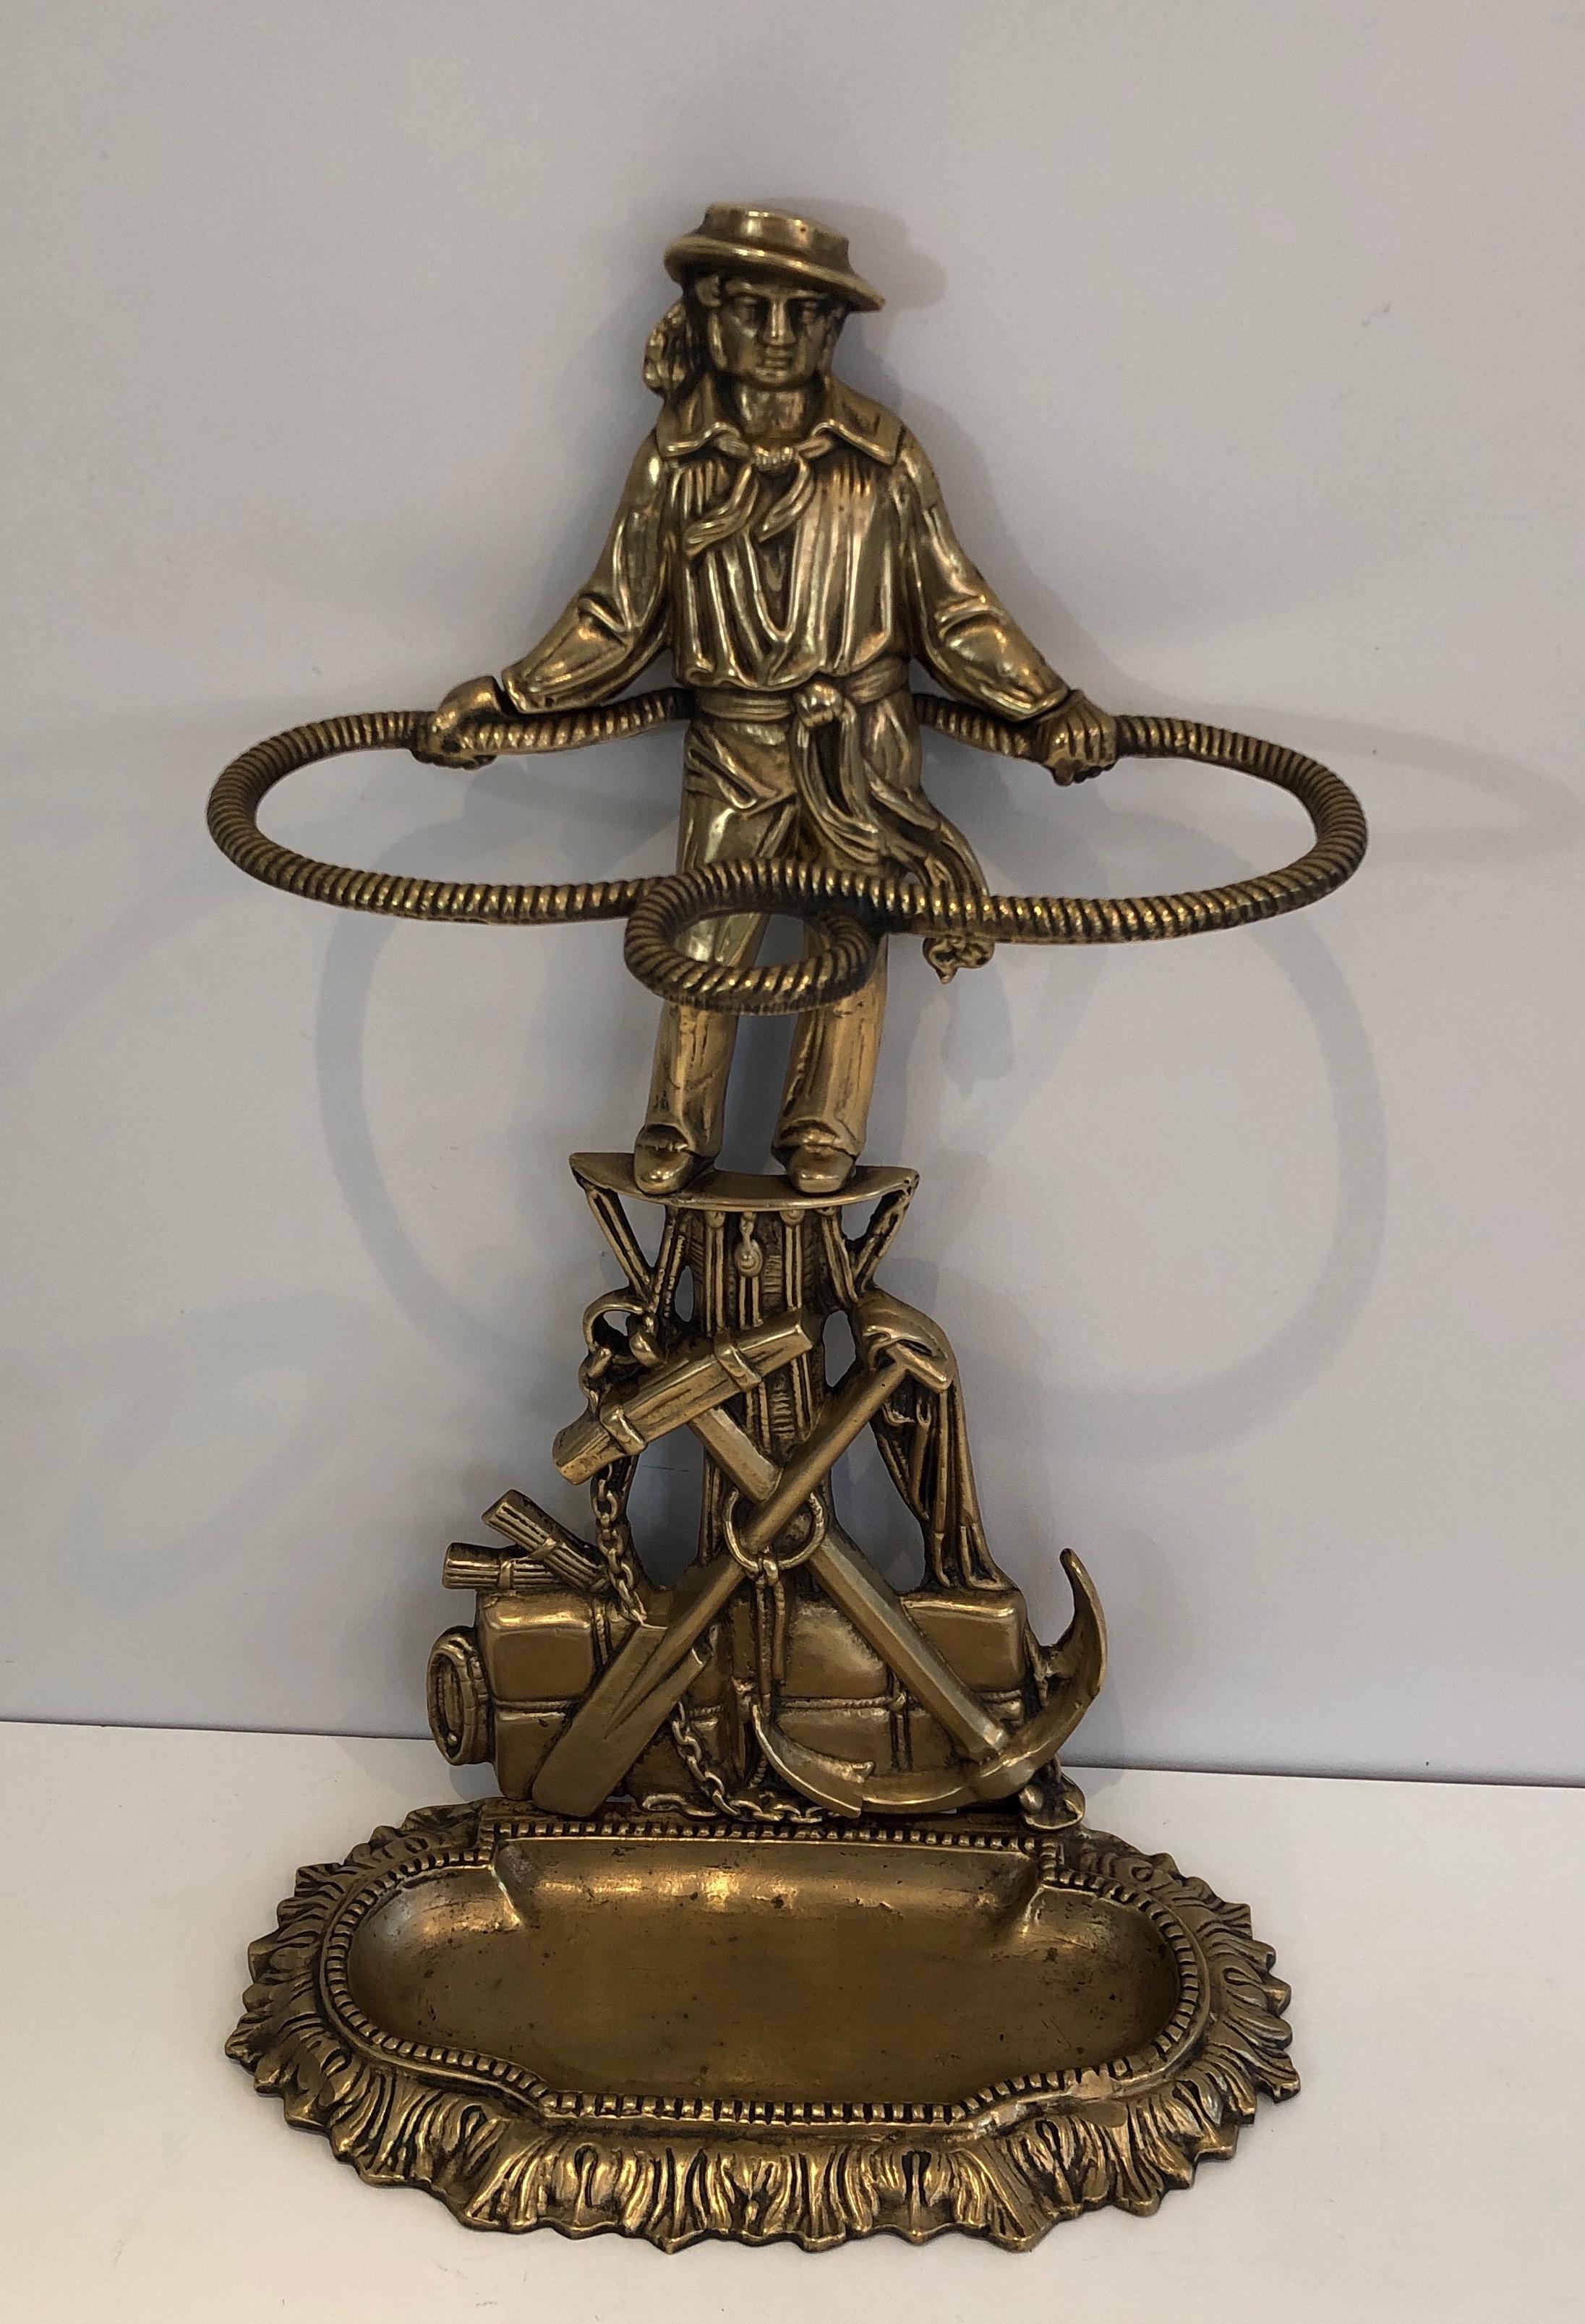 This rare umbrella stand showing a sailor is all made of braobnze. This is a French. work, circa 1970.